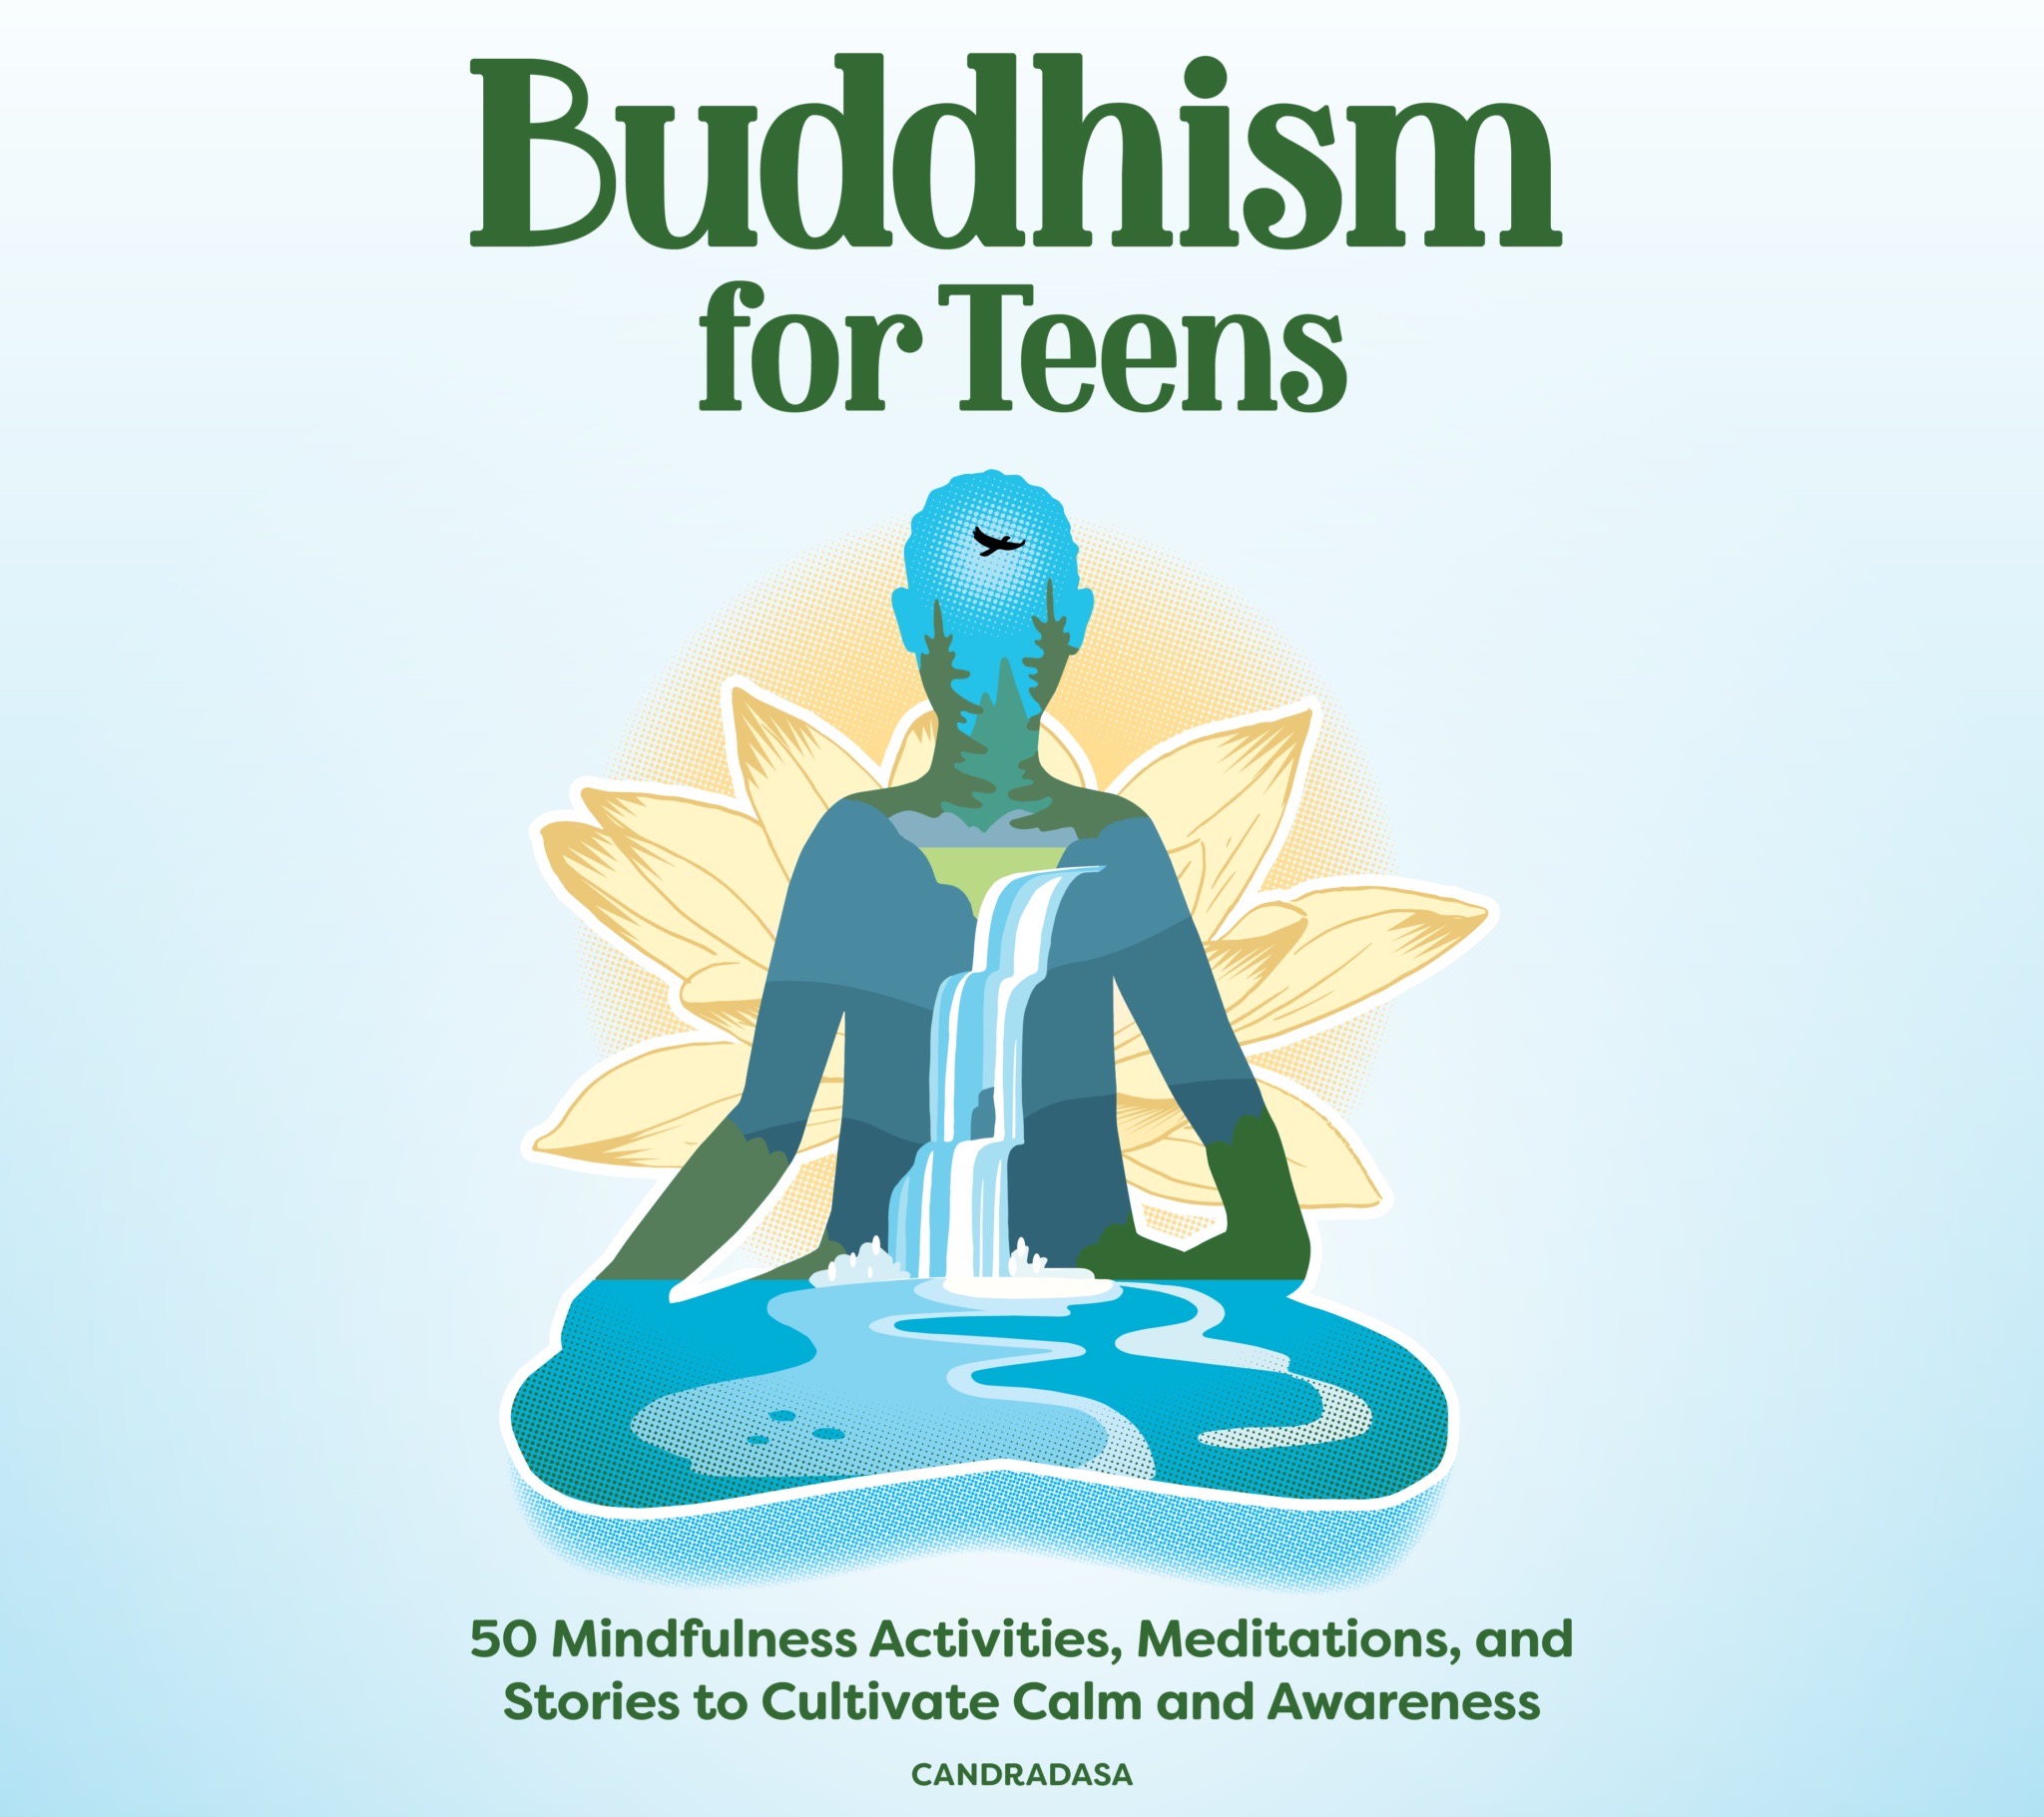 Daxistin Buddhism For Teens (The Buddhist Centre Podcast, Episode 424)